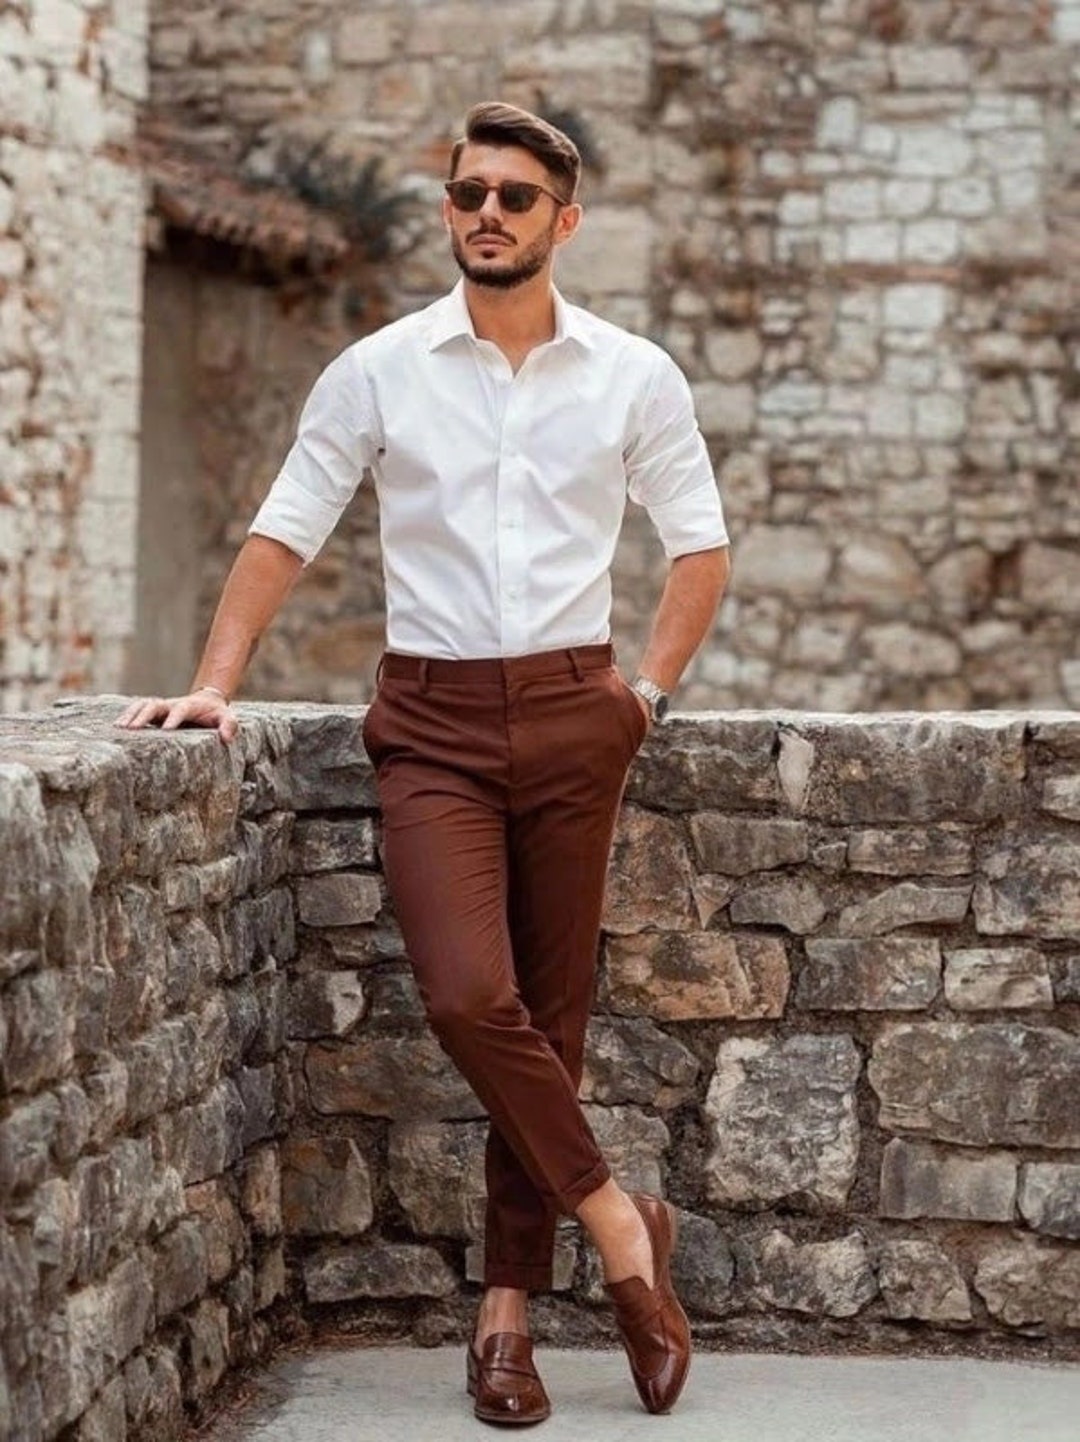 STYLING BROWN PANTS | Gallery posted by Nathalia Destri | Lemon8